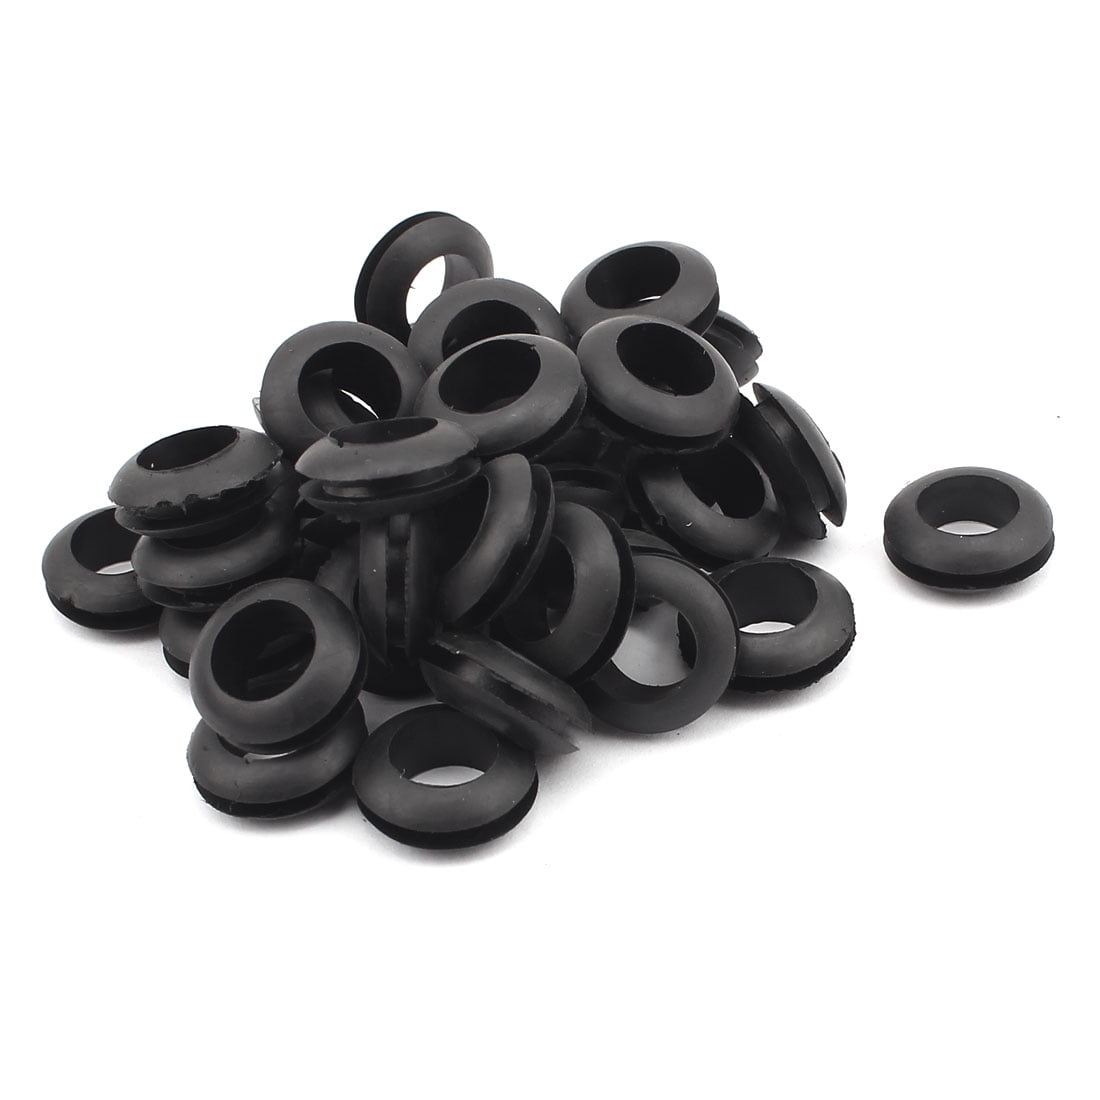 Details about   10x rubber Tapered Grommet Gasket Firewall Wire Gasket Cable Protector Seal_Ring